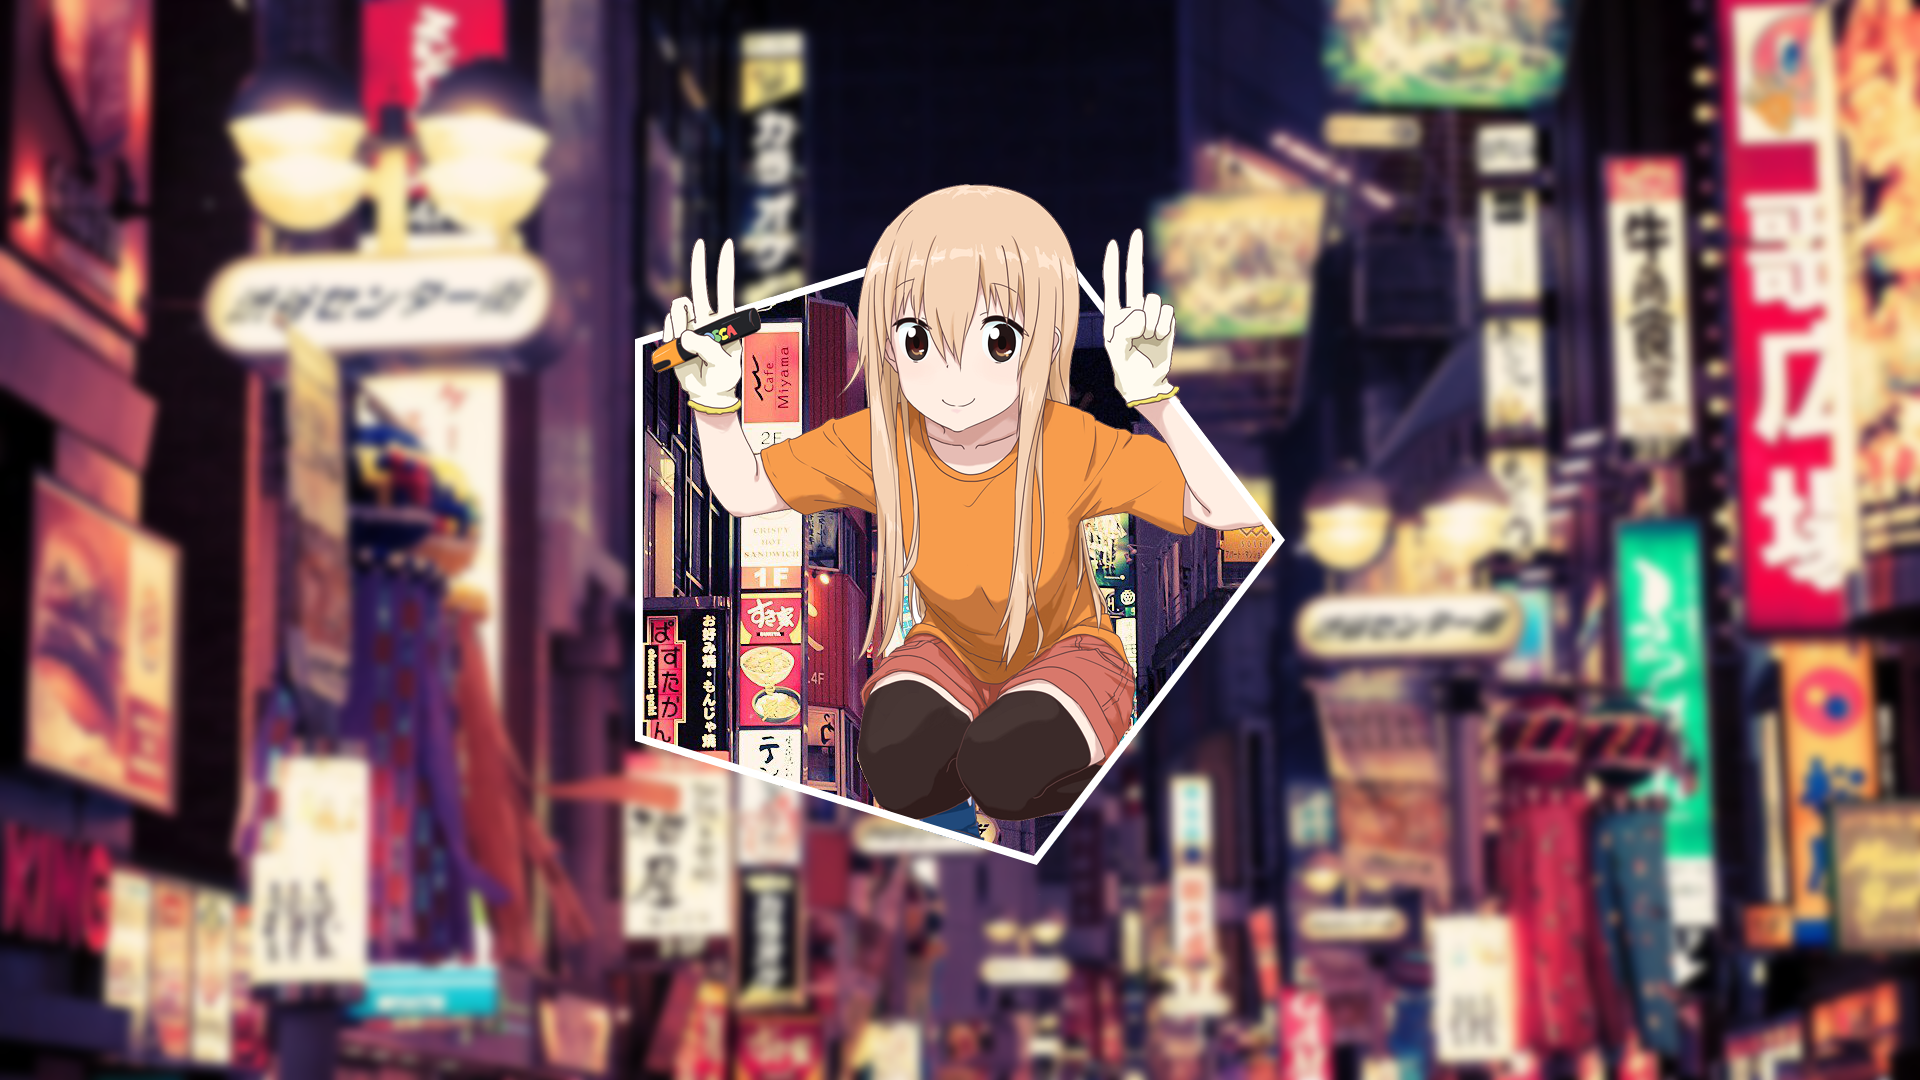 Anime 1920x1080 Himouto! Umaru-chan Doma Umaru anime girls picture-in-picture